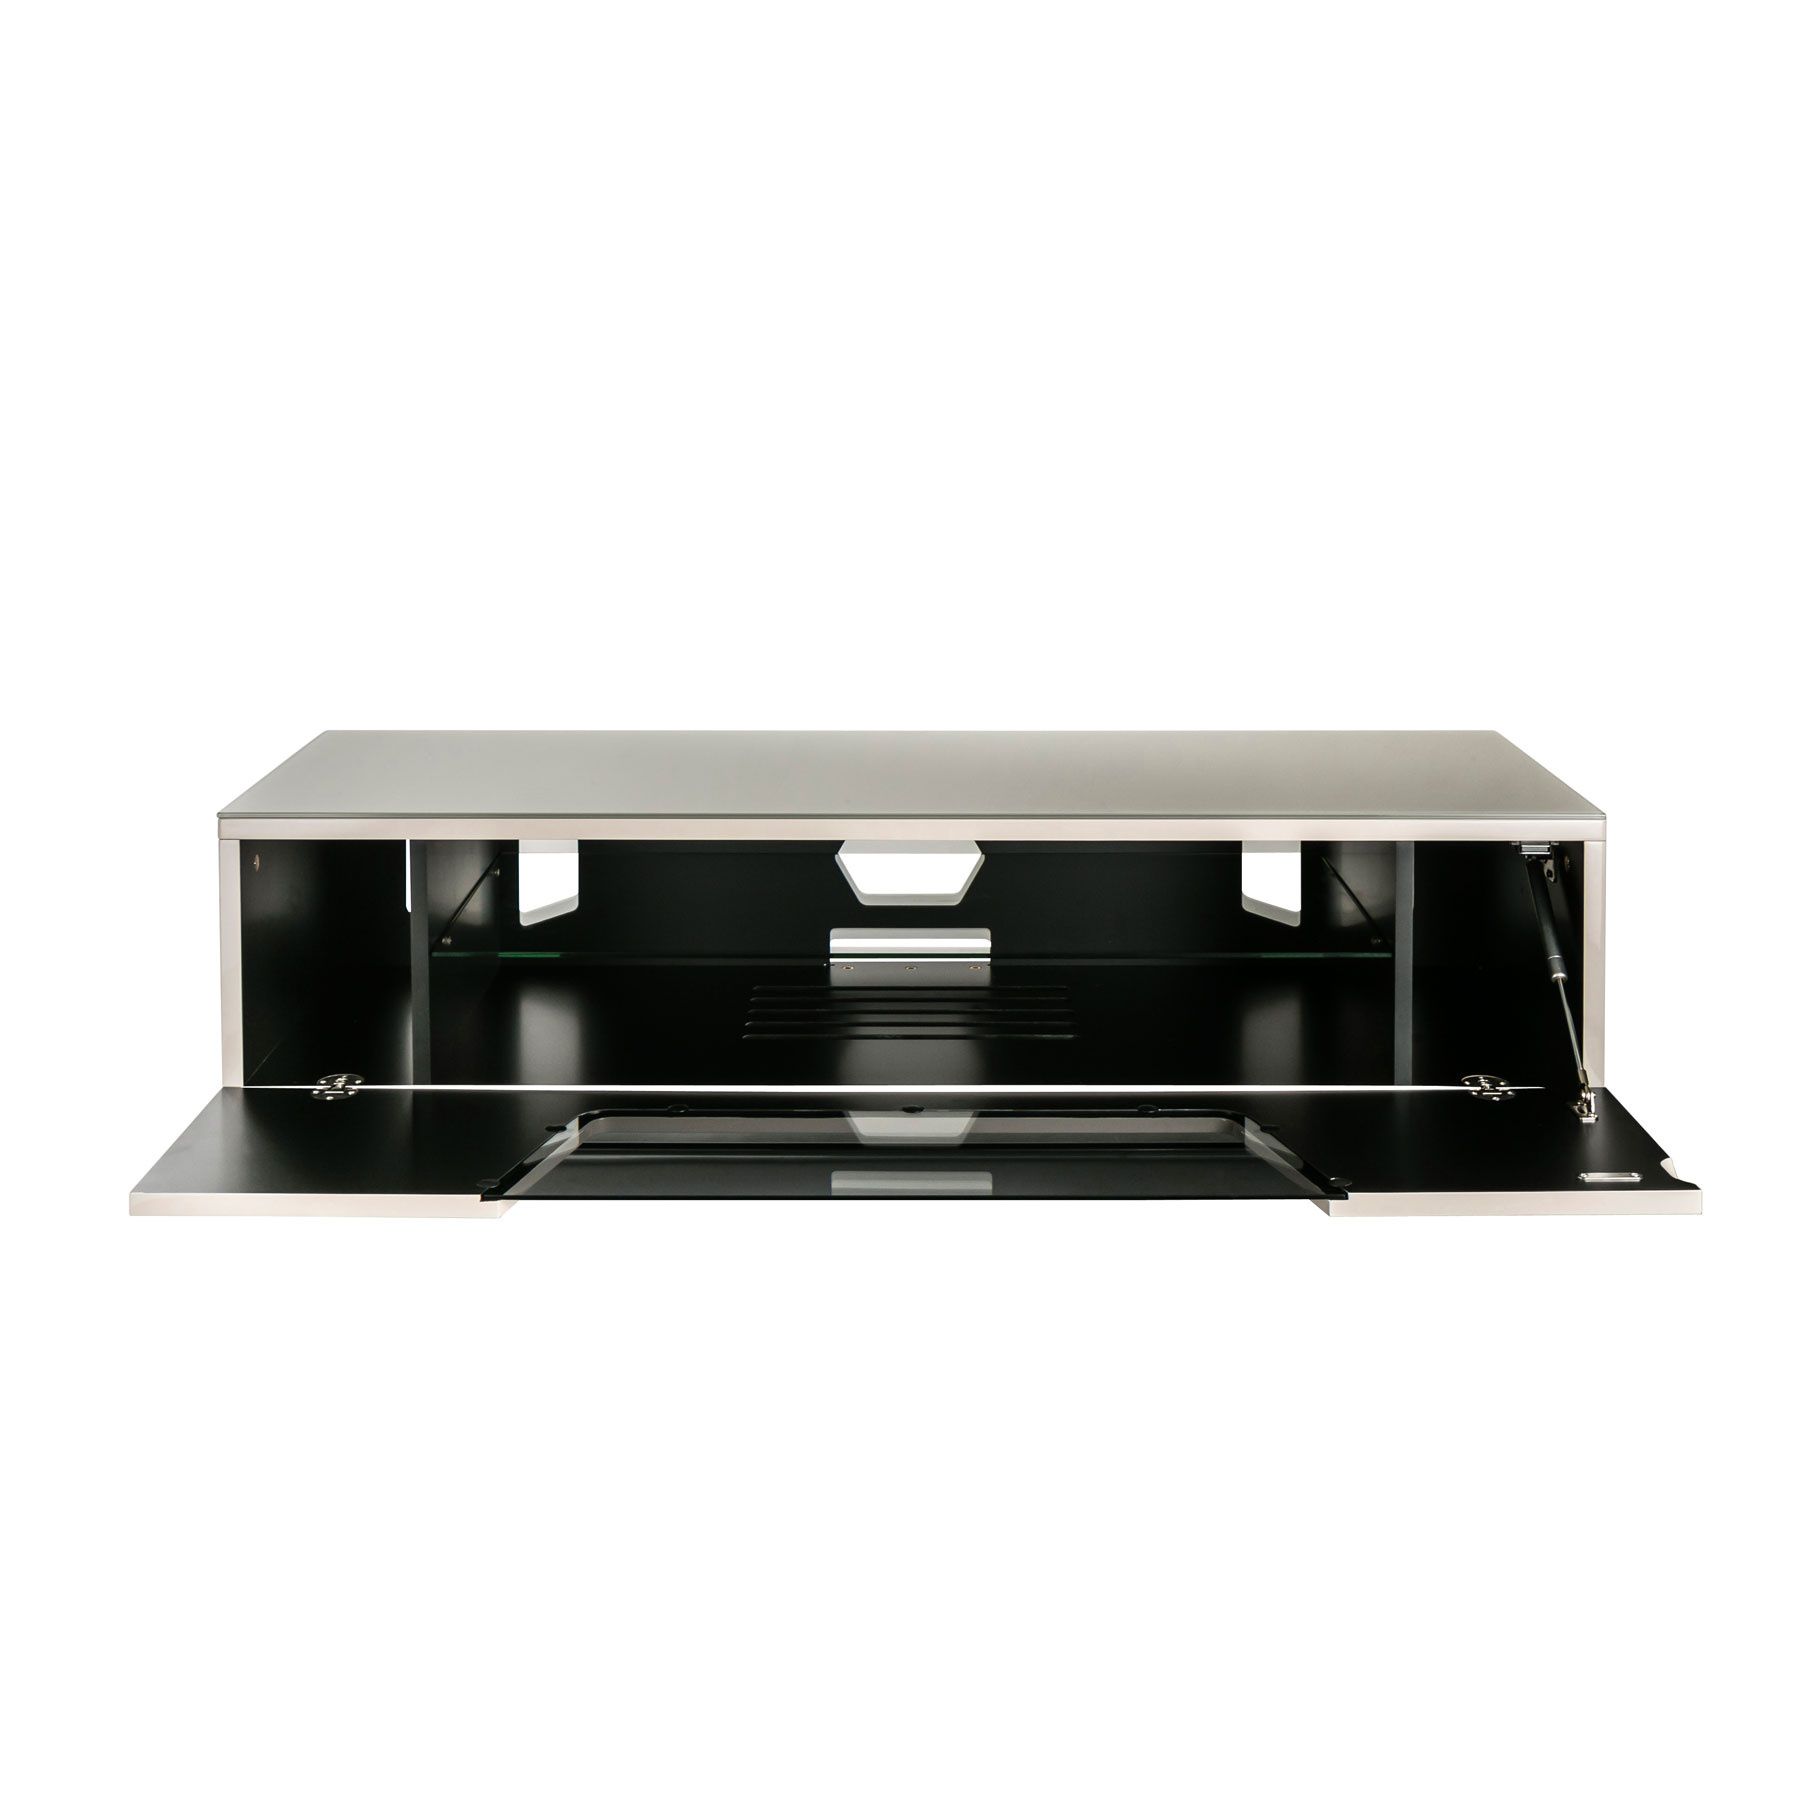 Alphason Chromium 2 120cm Ivory Tv Stand For Up To 60" Tvs Pertaining To Chromium Tv Stands (View 11 of 15)